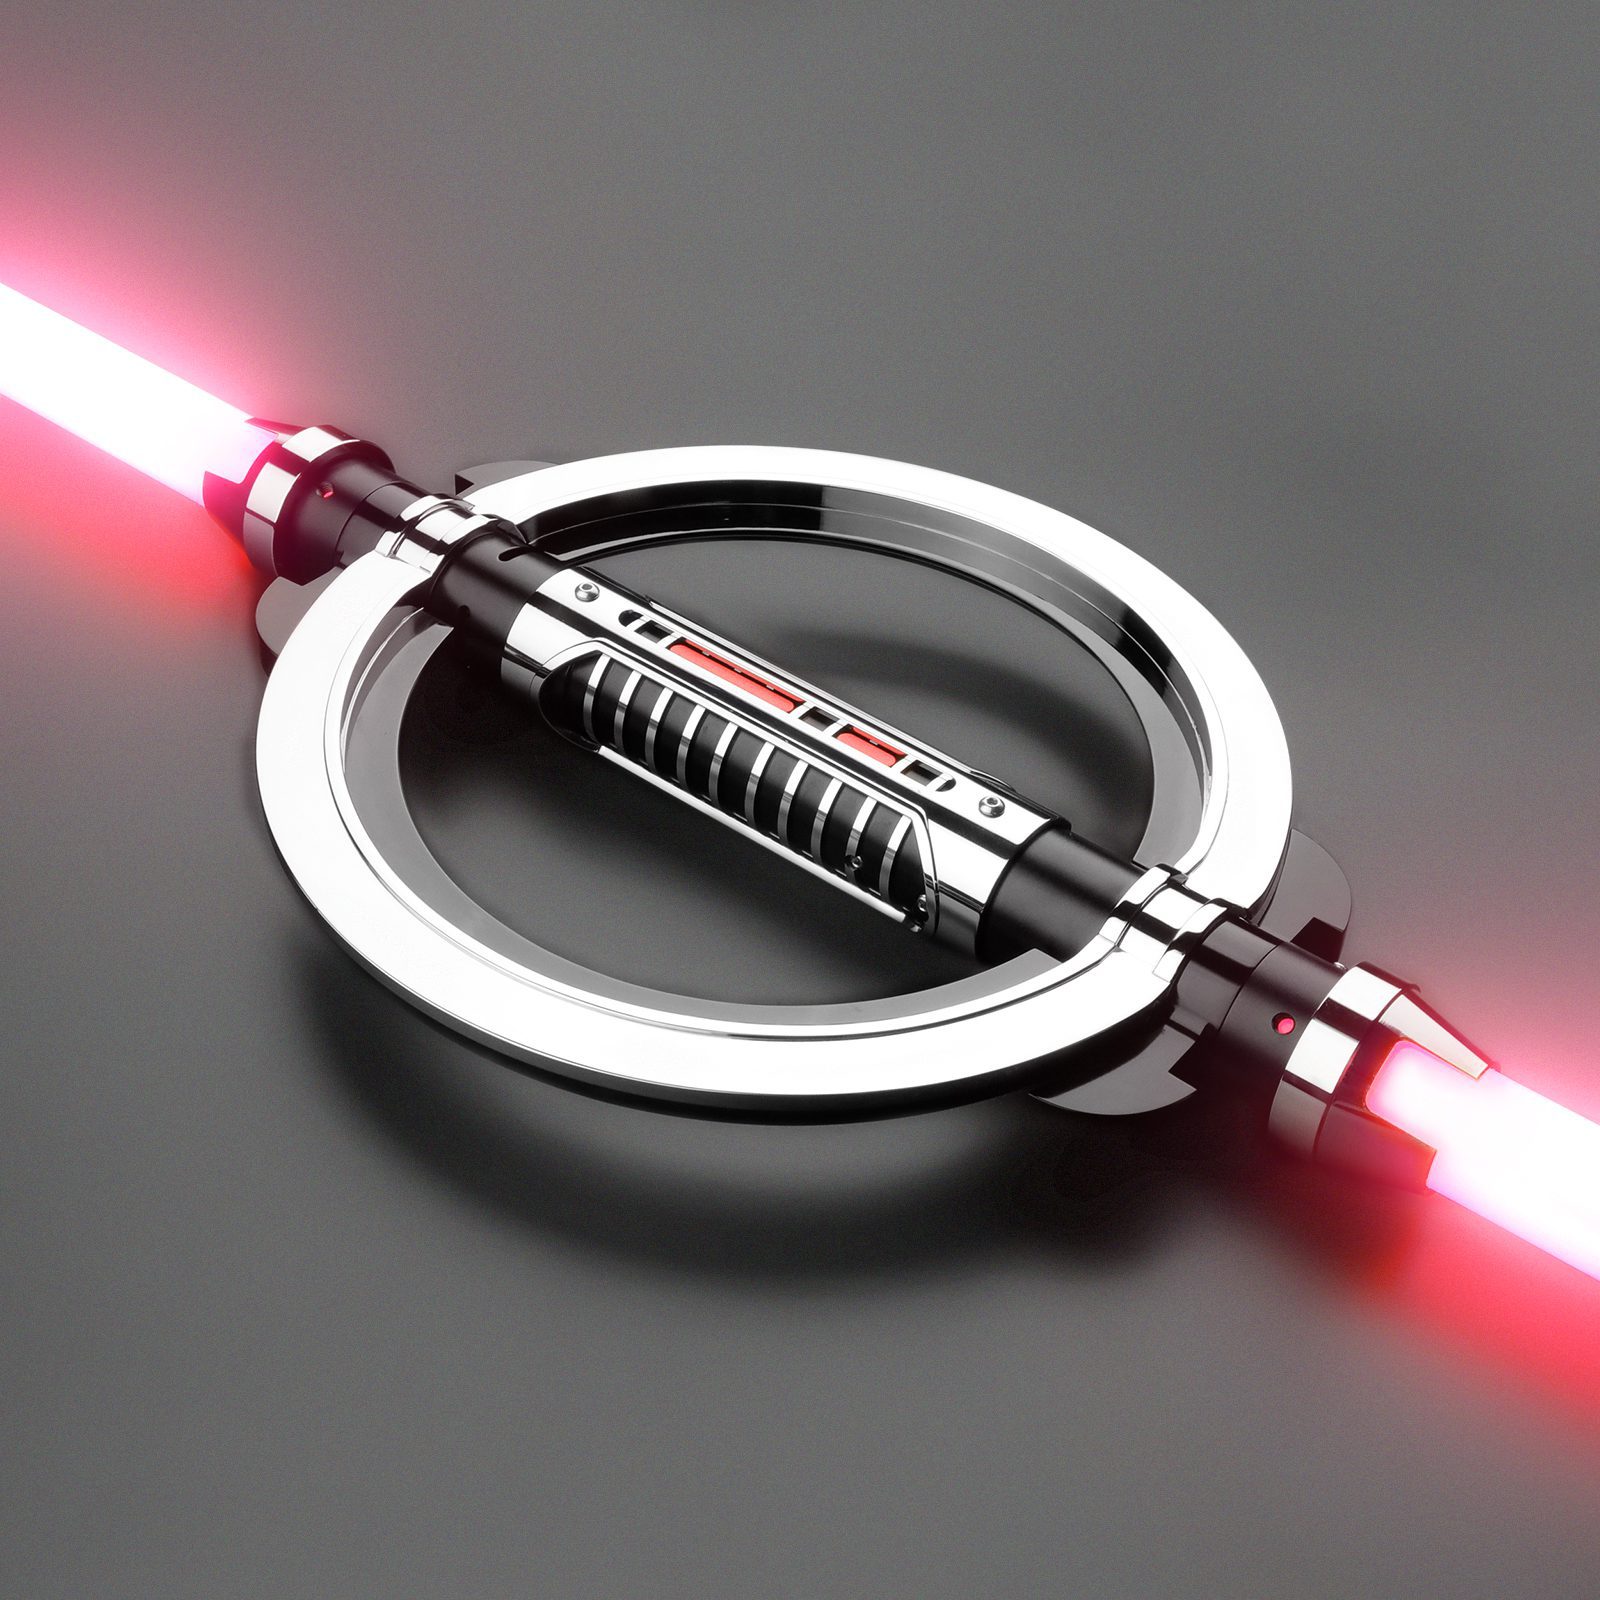 Lightsaber Charger USB Cable Suits for Most Lightsabers in Store 